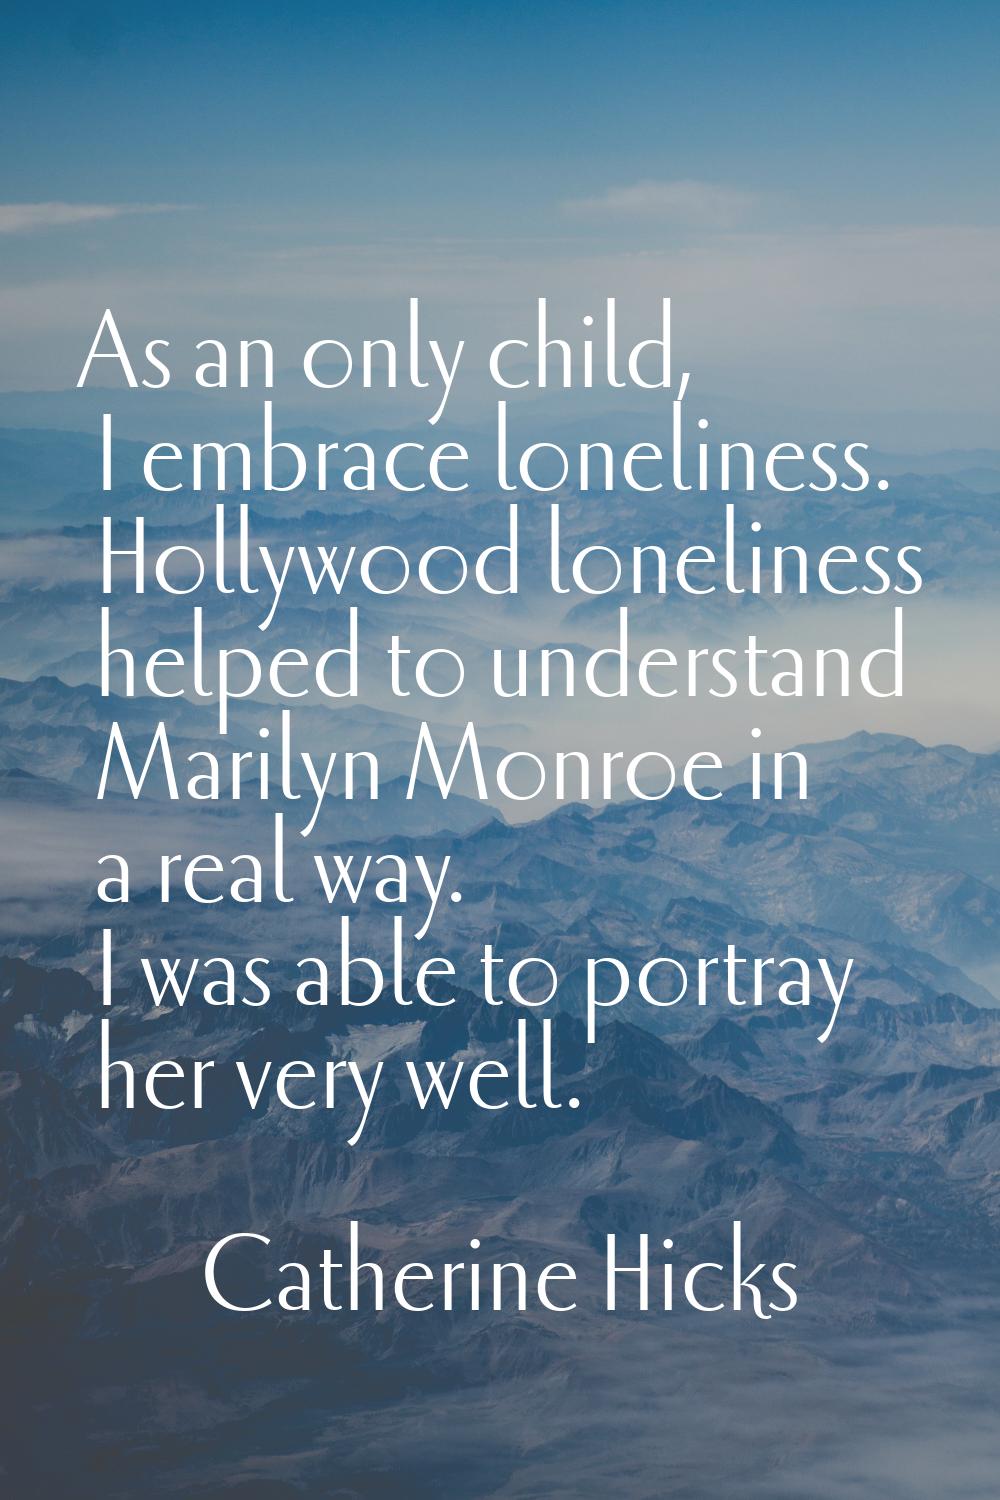 As an only child, I embrace loneliness. Hollywood loneliness helped to understand Marilyn Monroe in